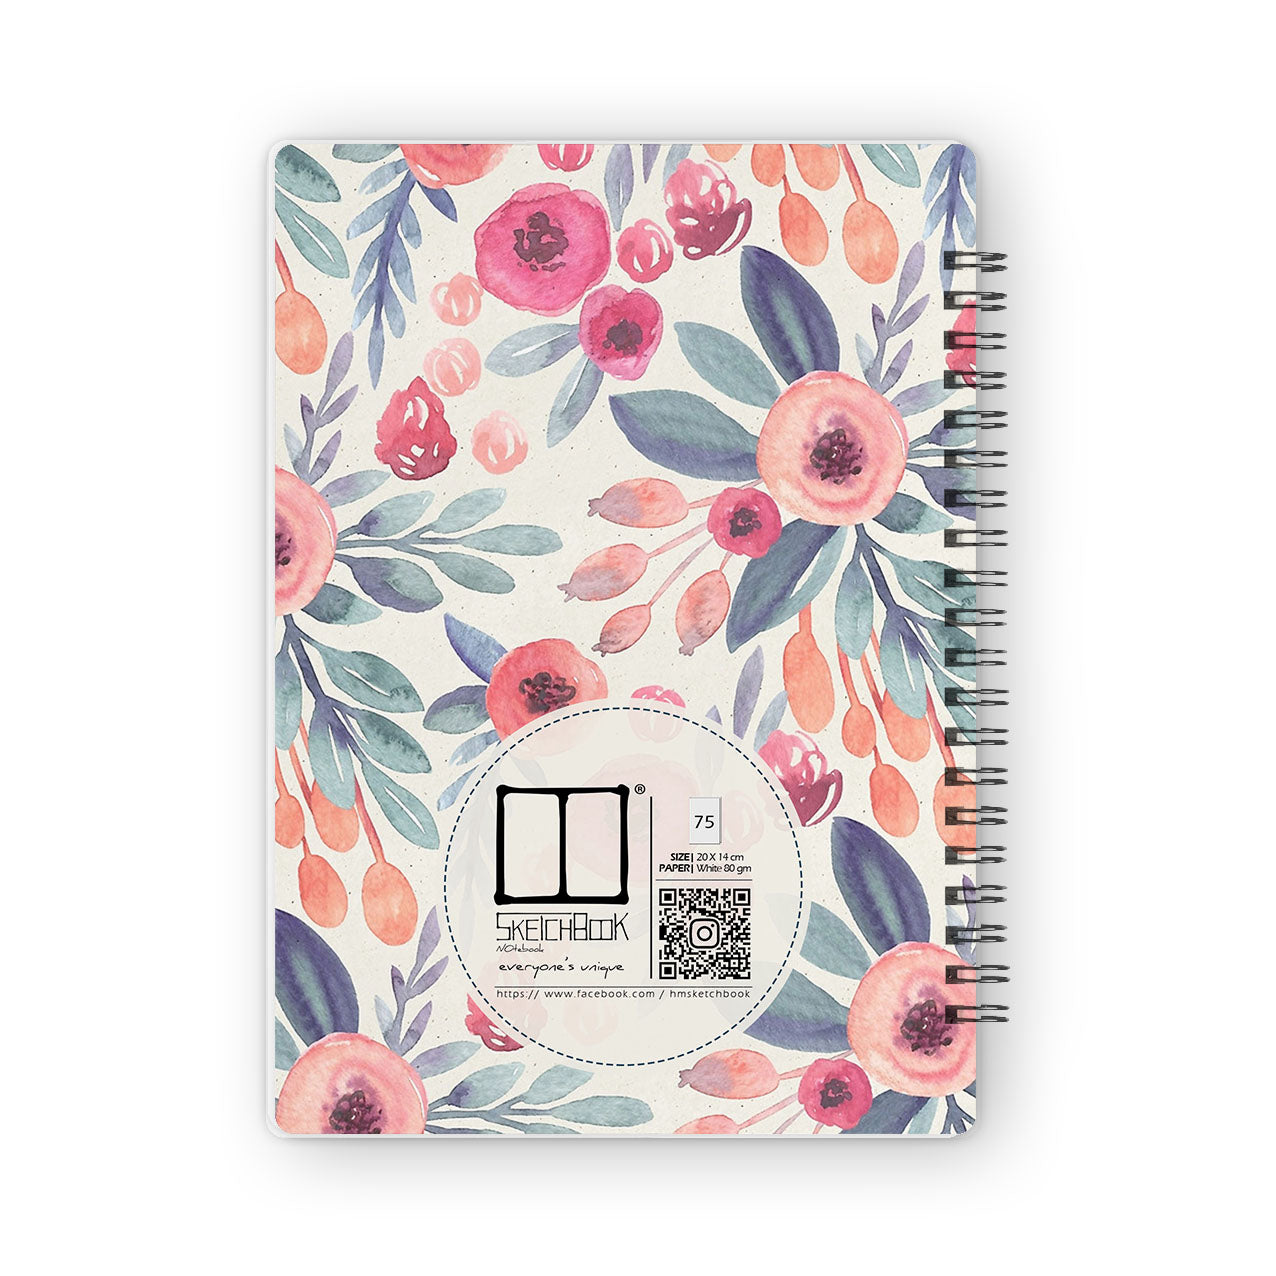 Notebooks | 20 X 14 cm - Floral - from SketchBook Stationery